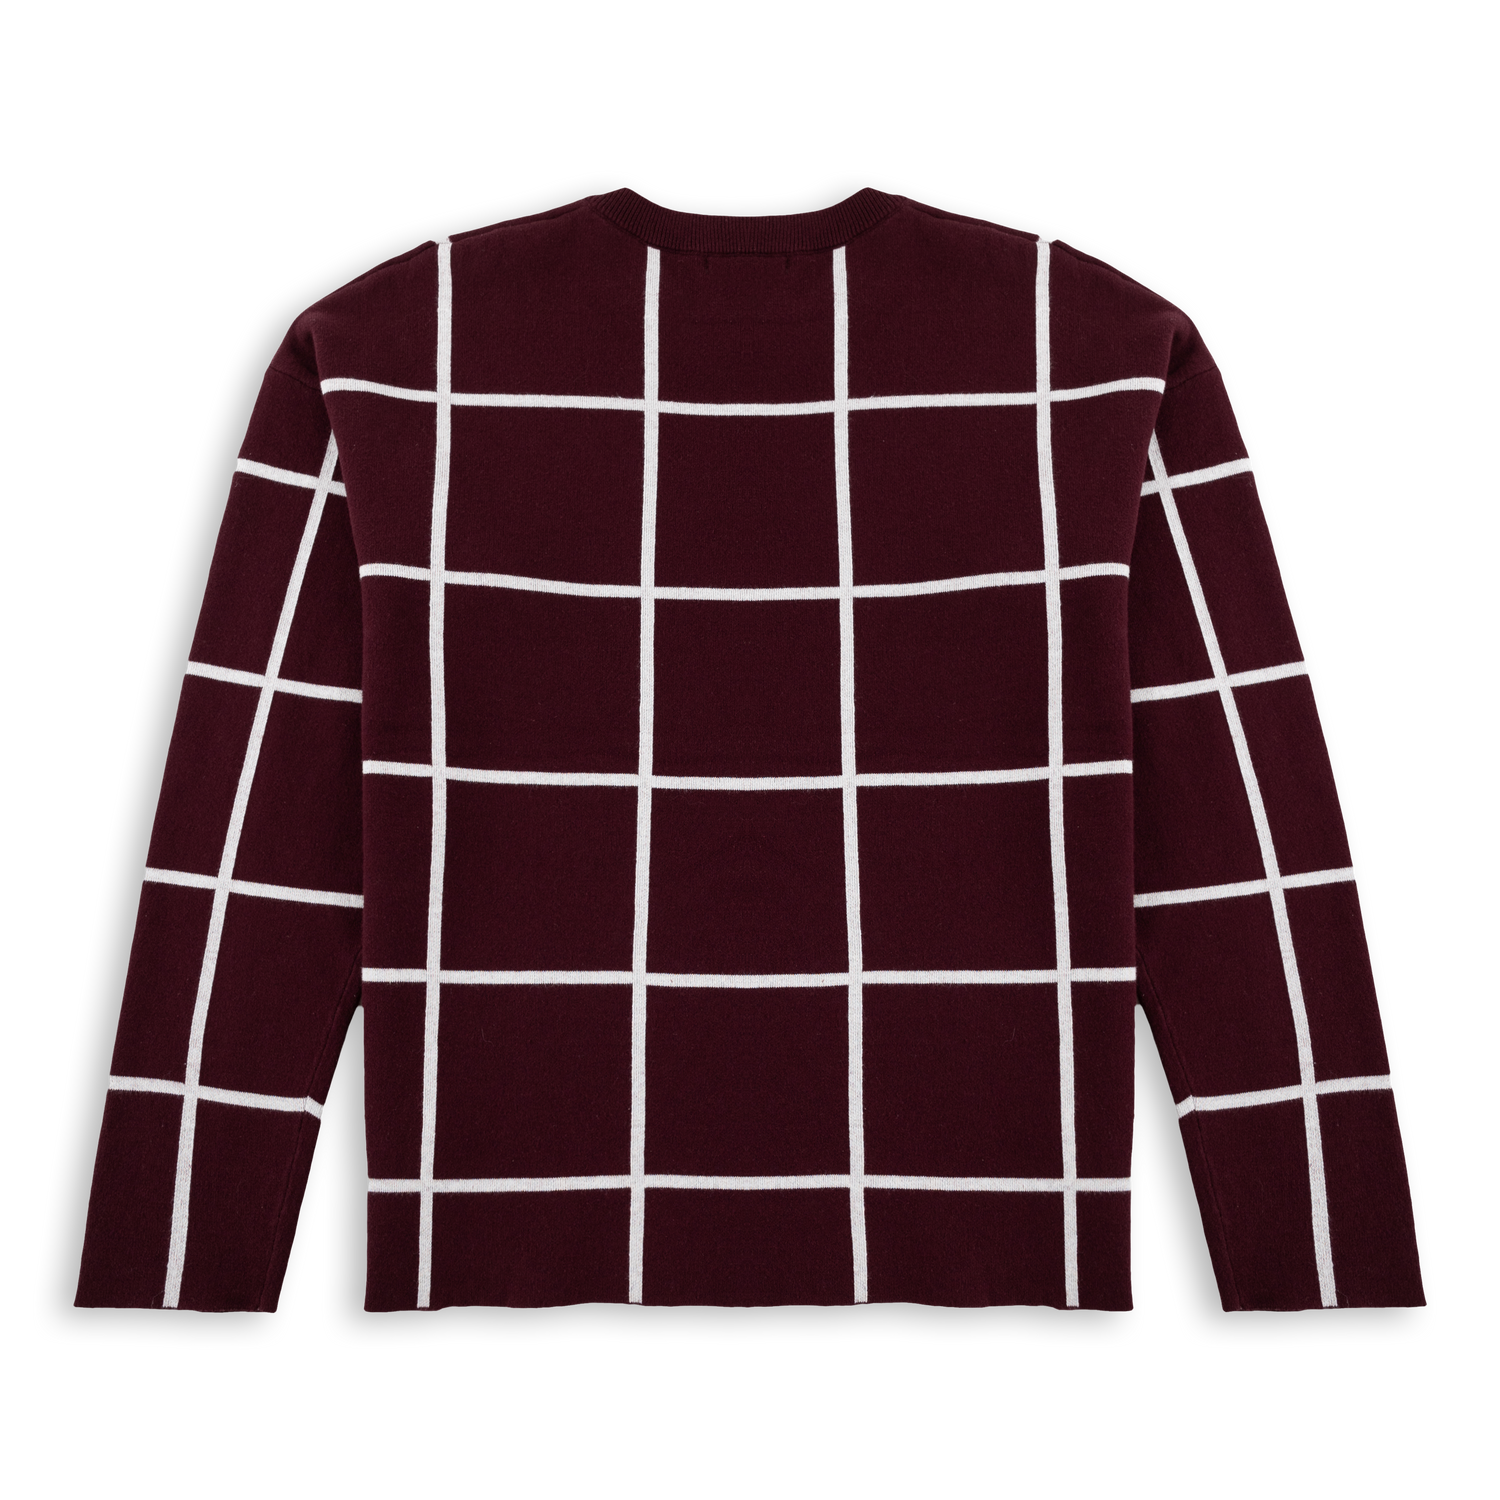 Texas A&M Maroon and White Grid Sweater